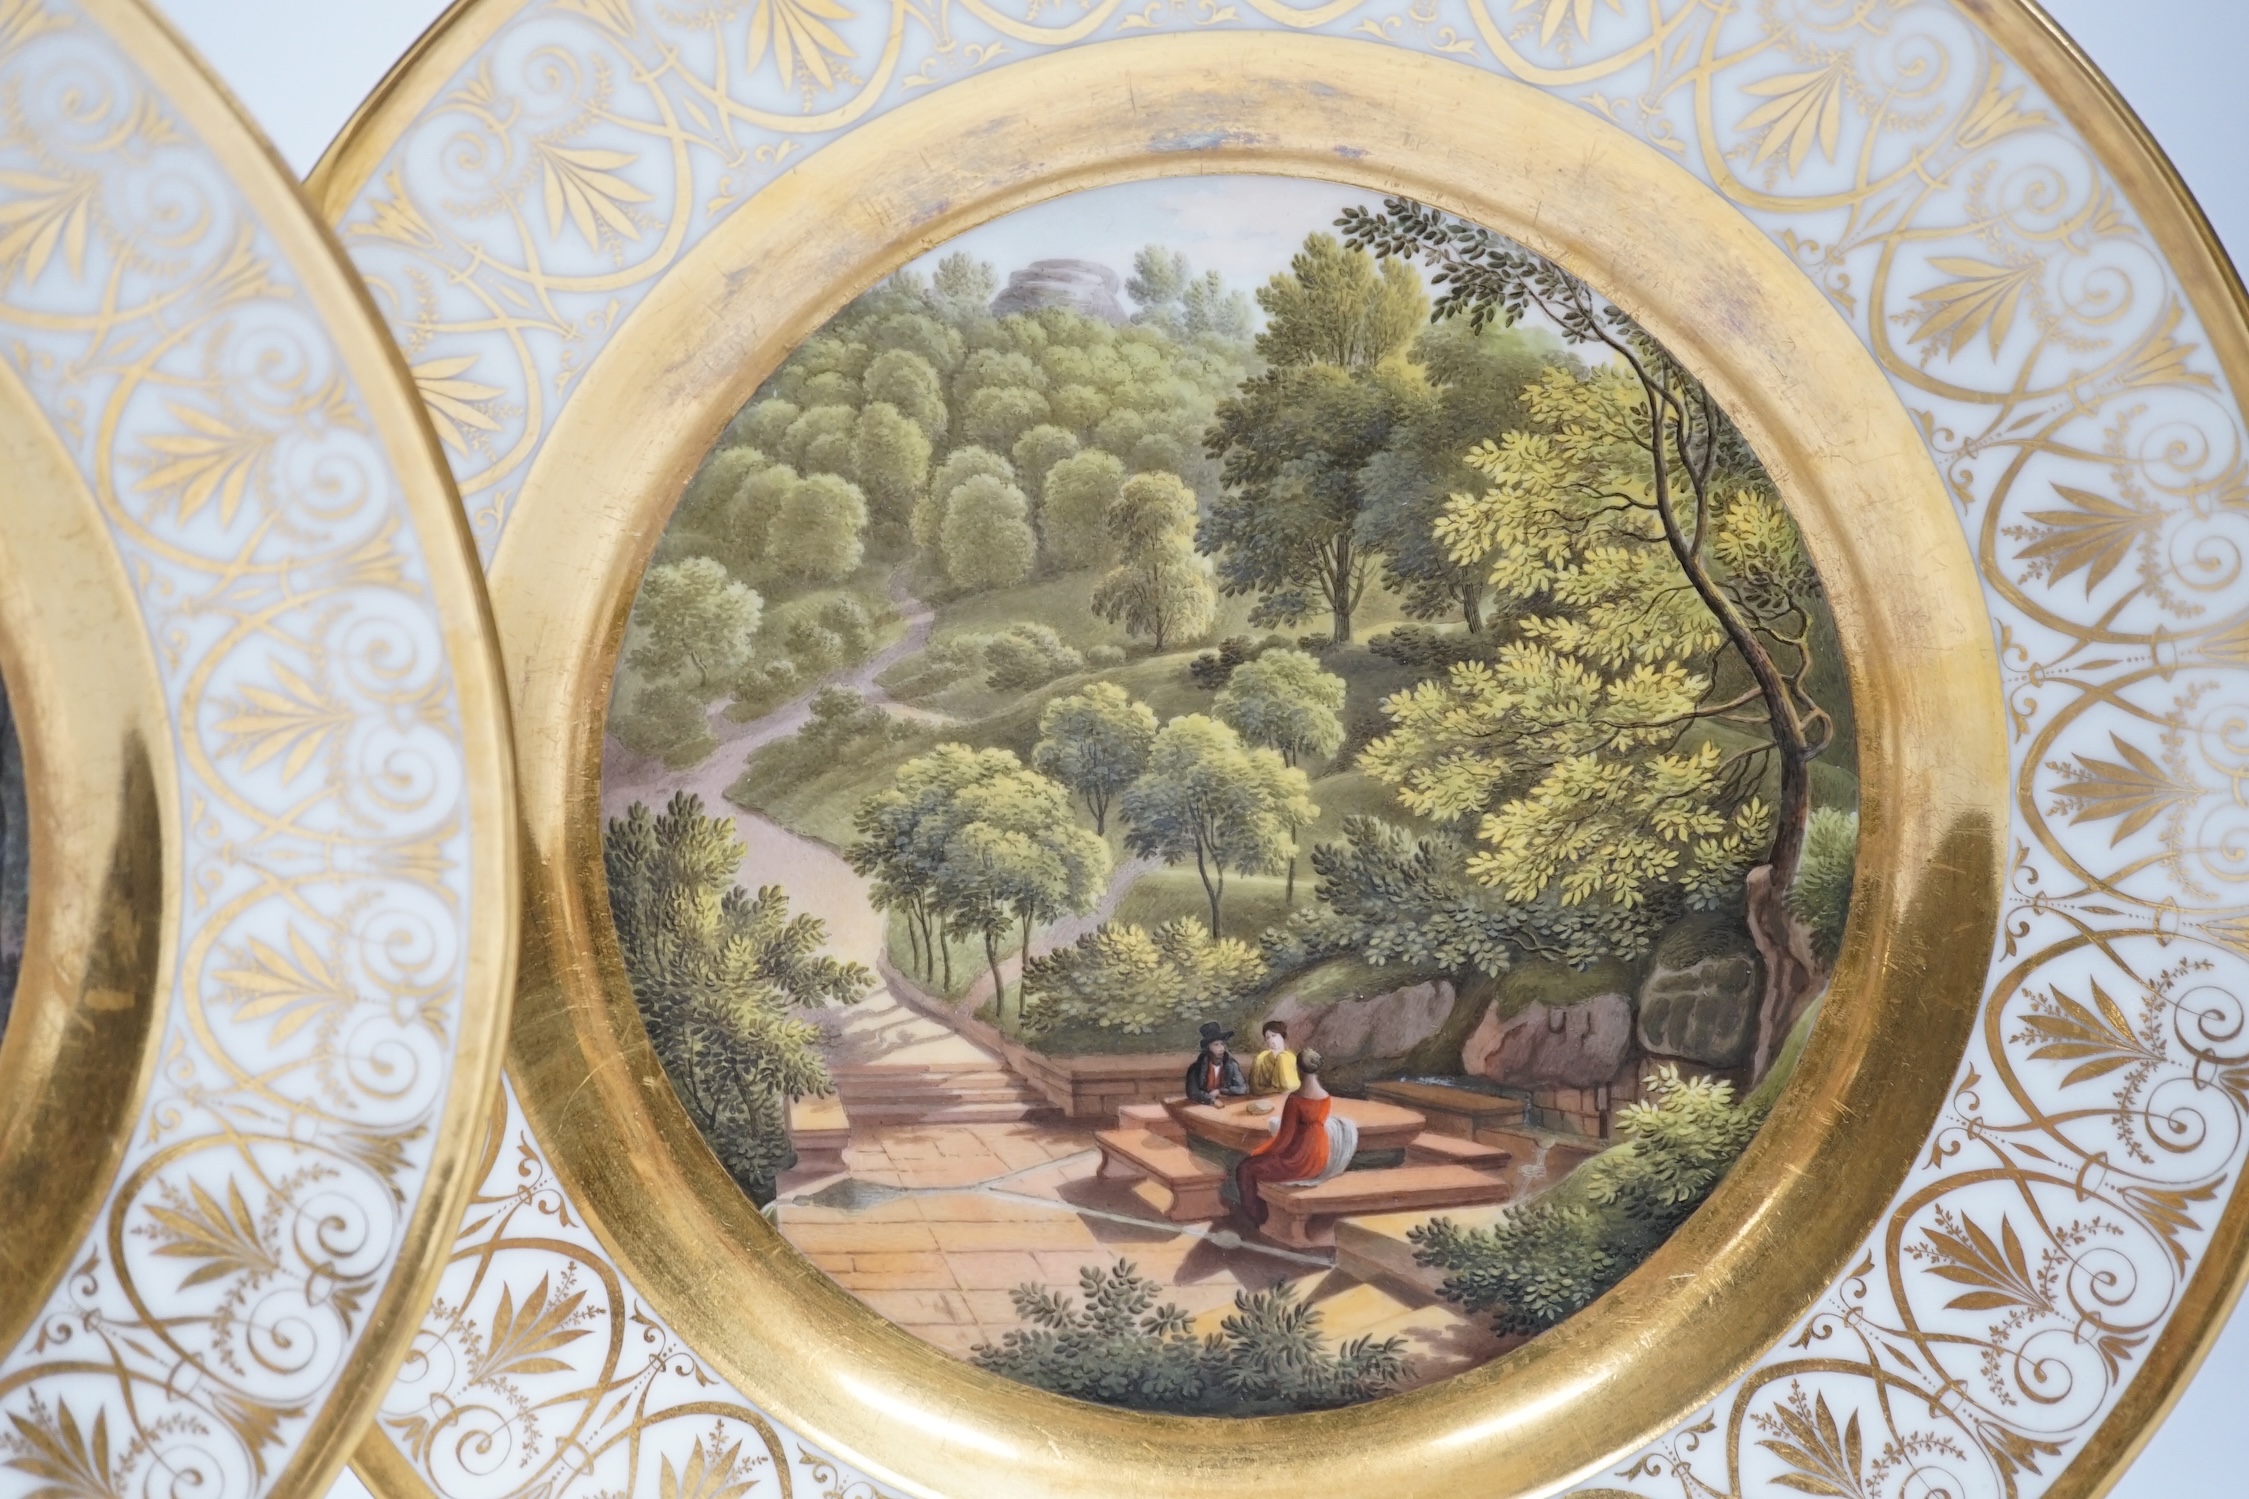 A pair of early 19th century Paris porcelain titled landscape and gilt decorated dishes, 24.5cm diameter